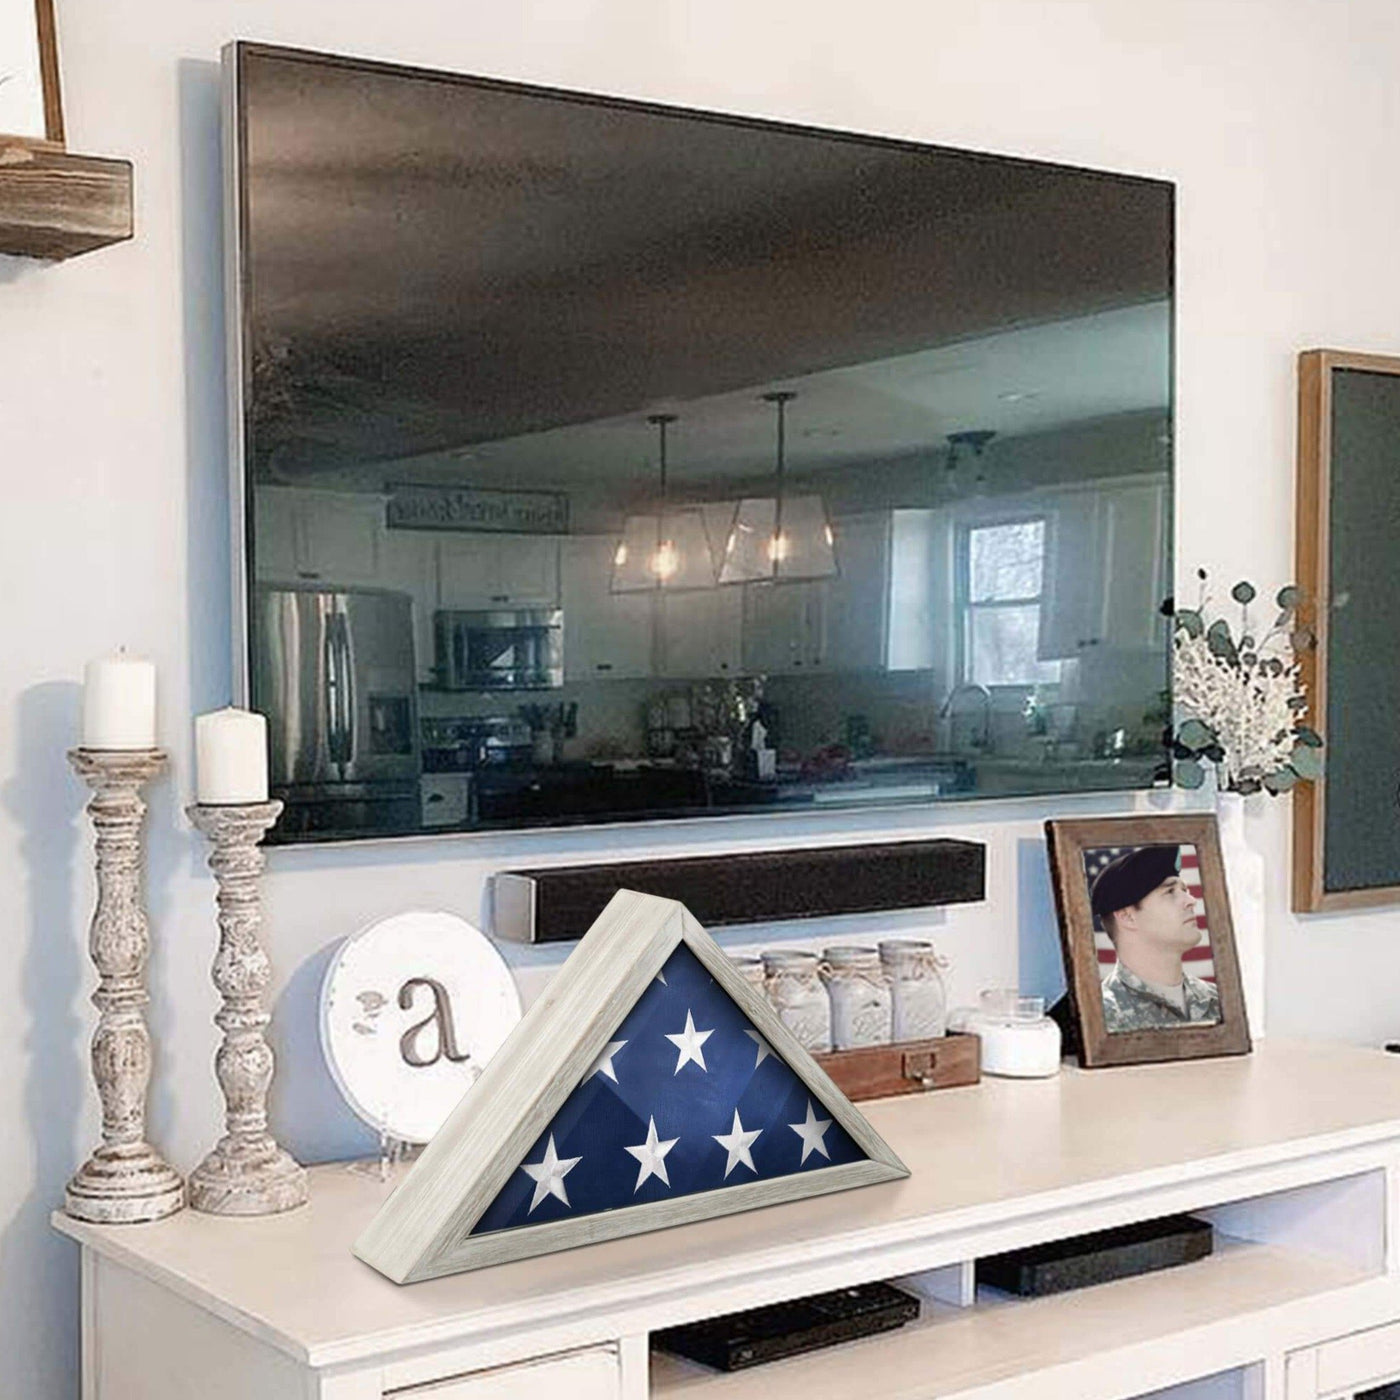 Rustic Military Flag Display Case for 9.5 x 5 American Veteran Burial Flag - Whitewashed Wood